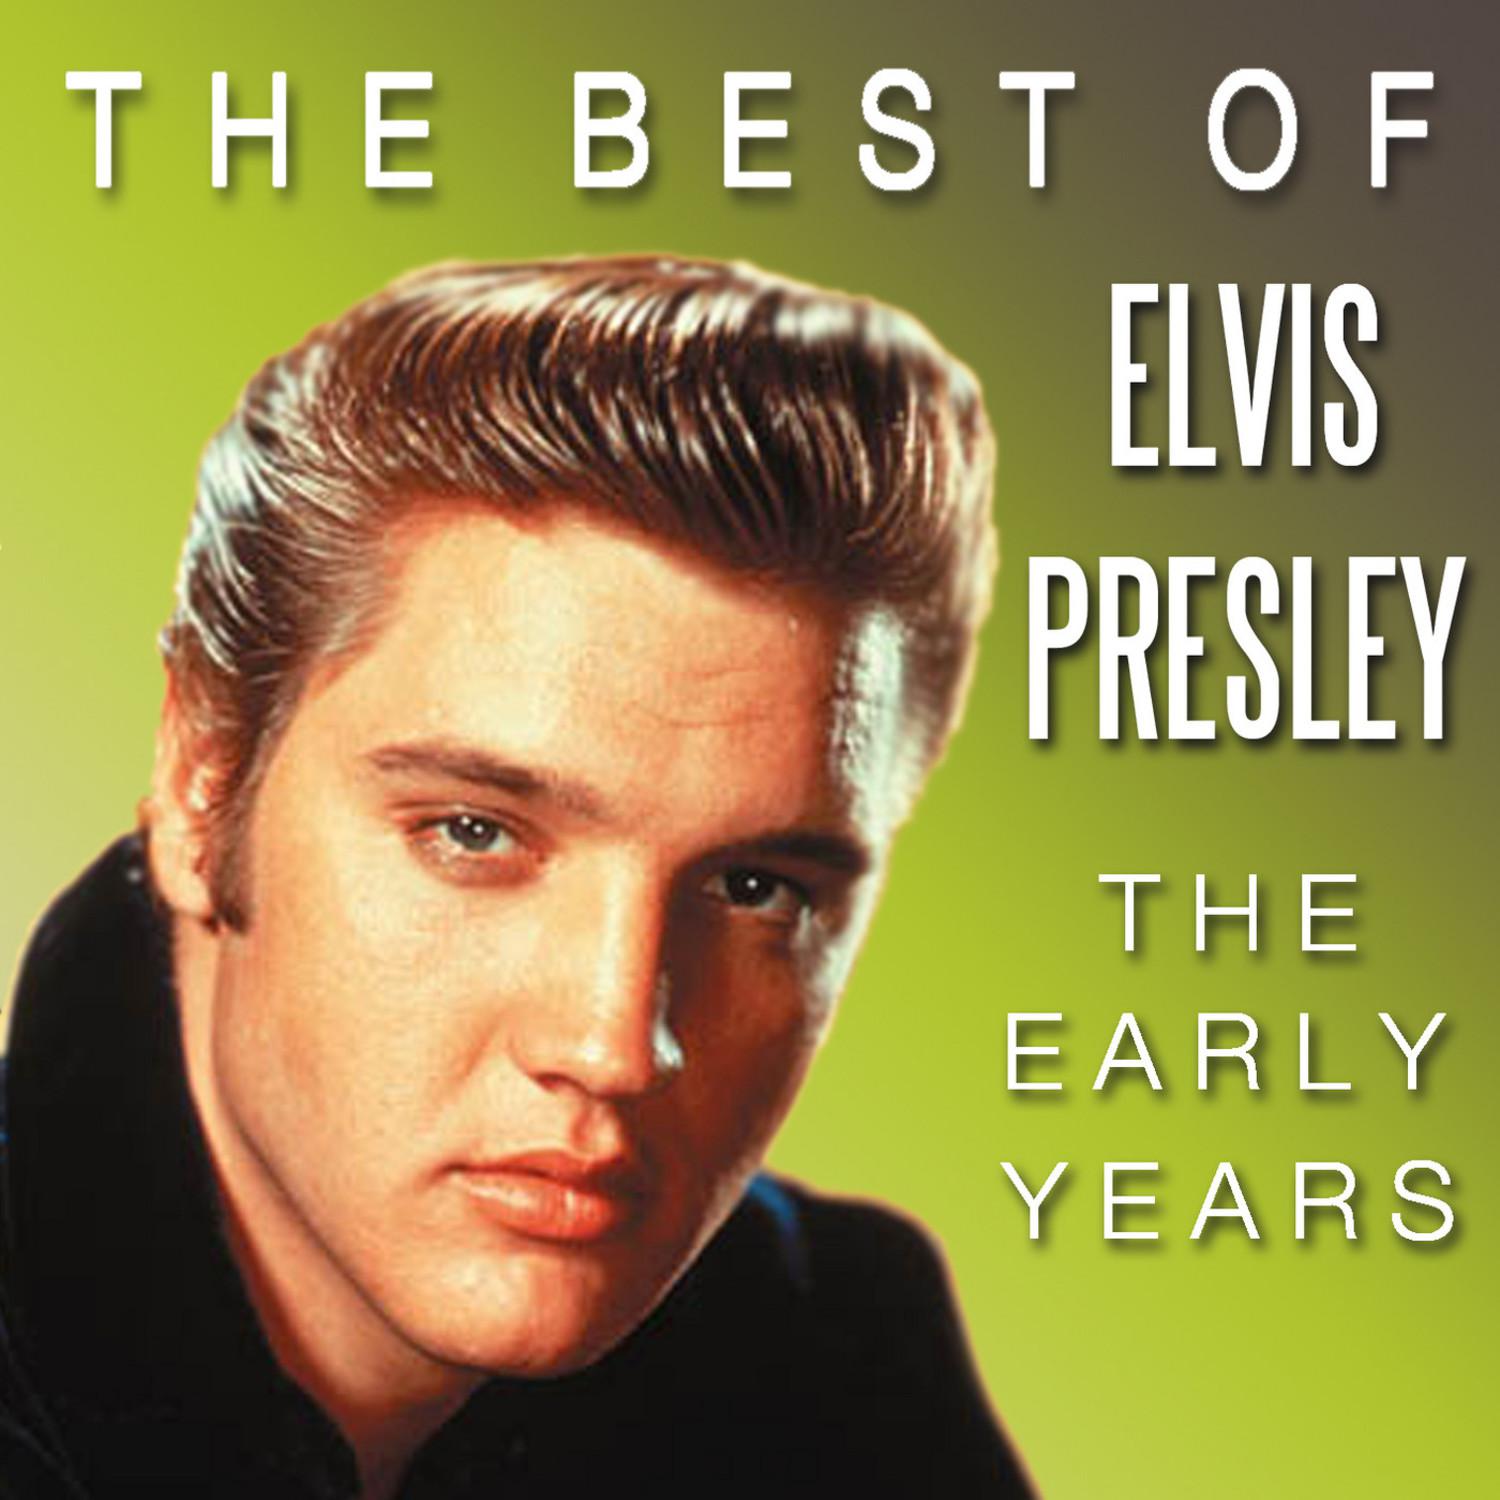 The Best of Elvis Presley - The Early Years